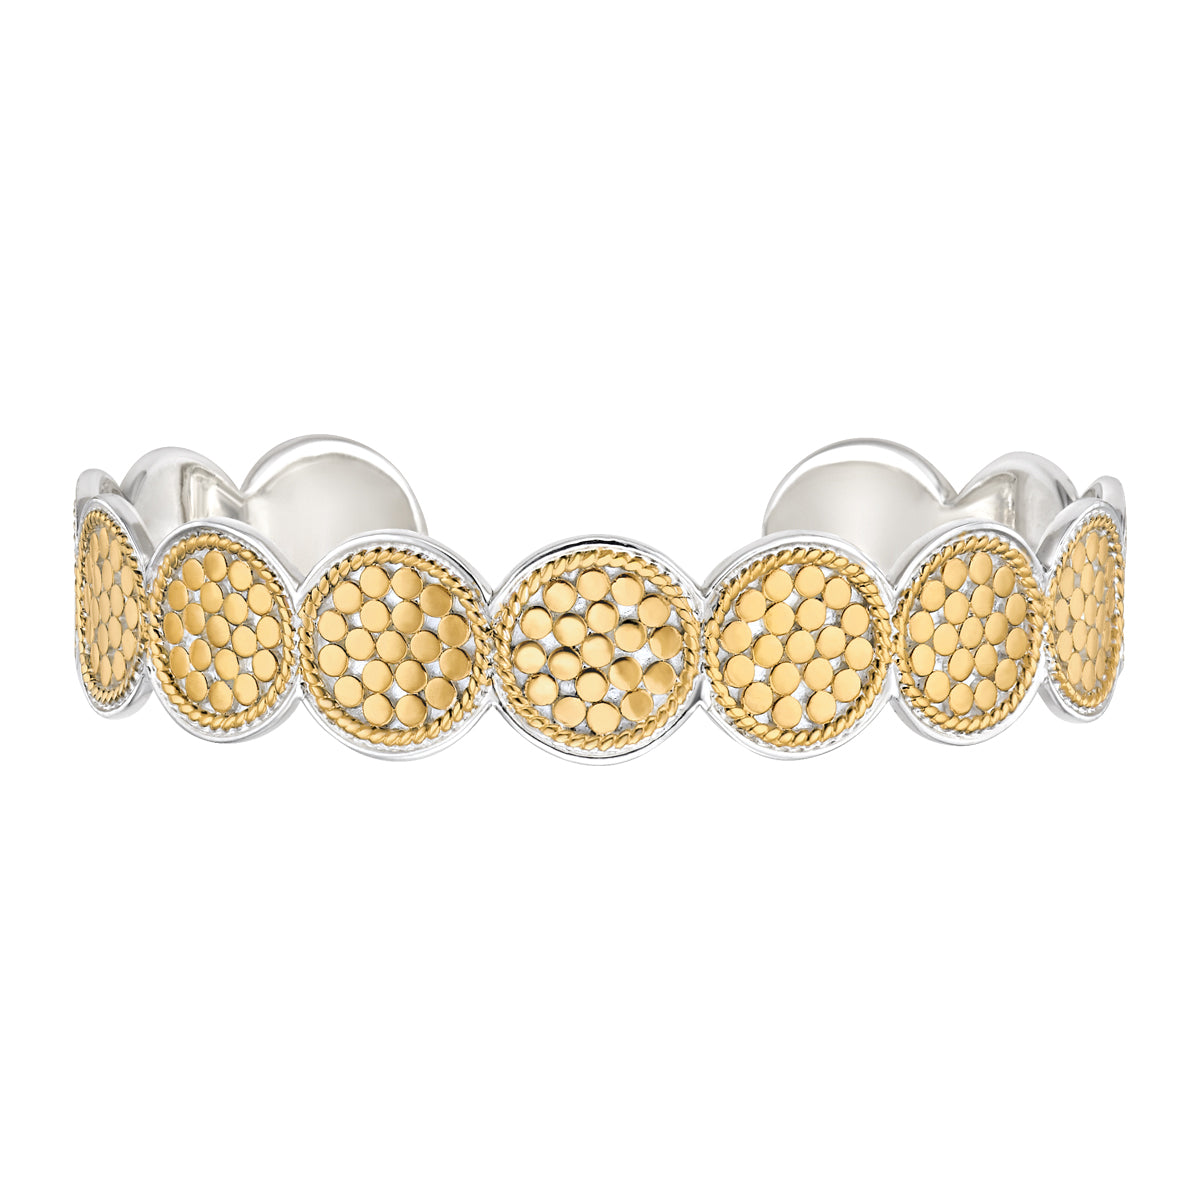 Multi disc silver cuff bracelet with small gold dot decoration